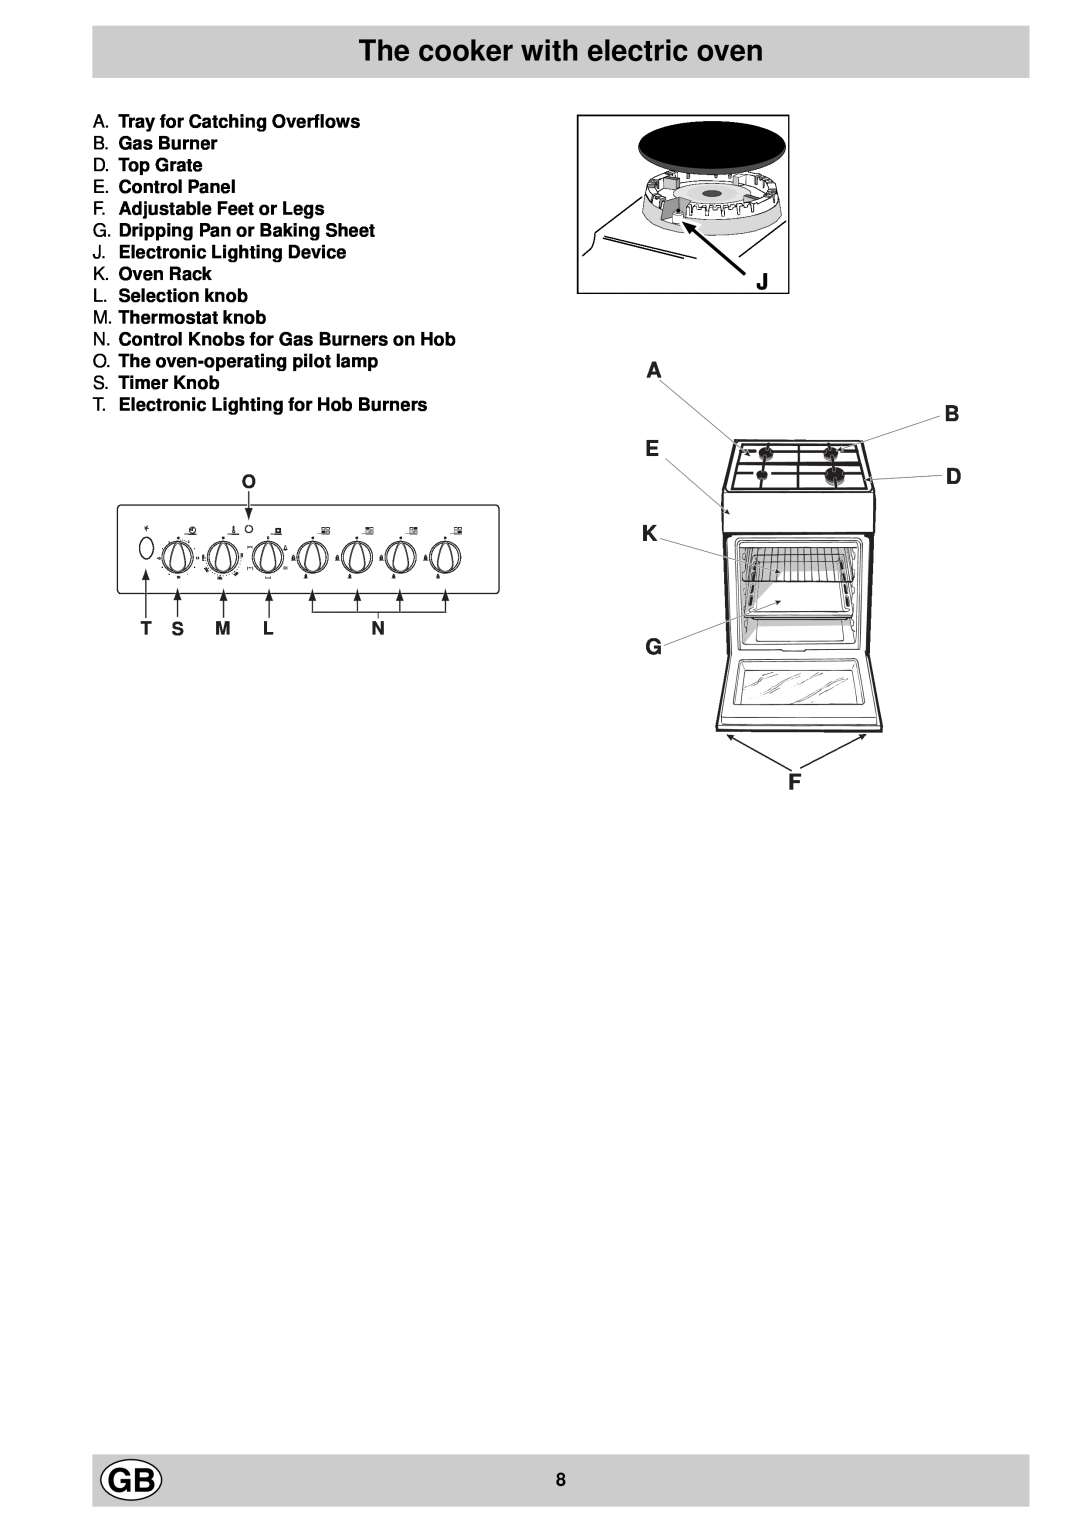 Indesit K3G11/G manual The cooker with electric oven, D K G F 